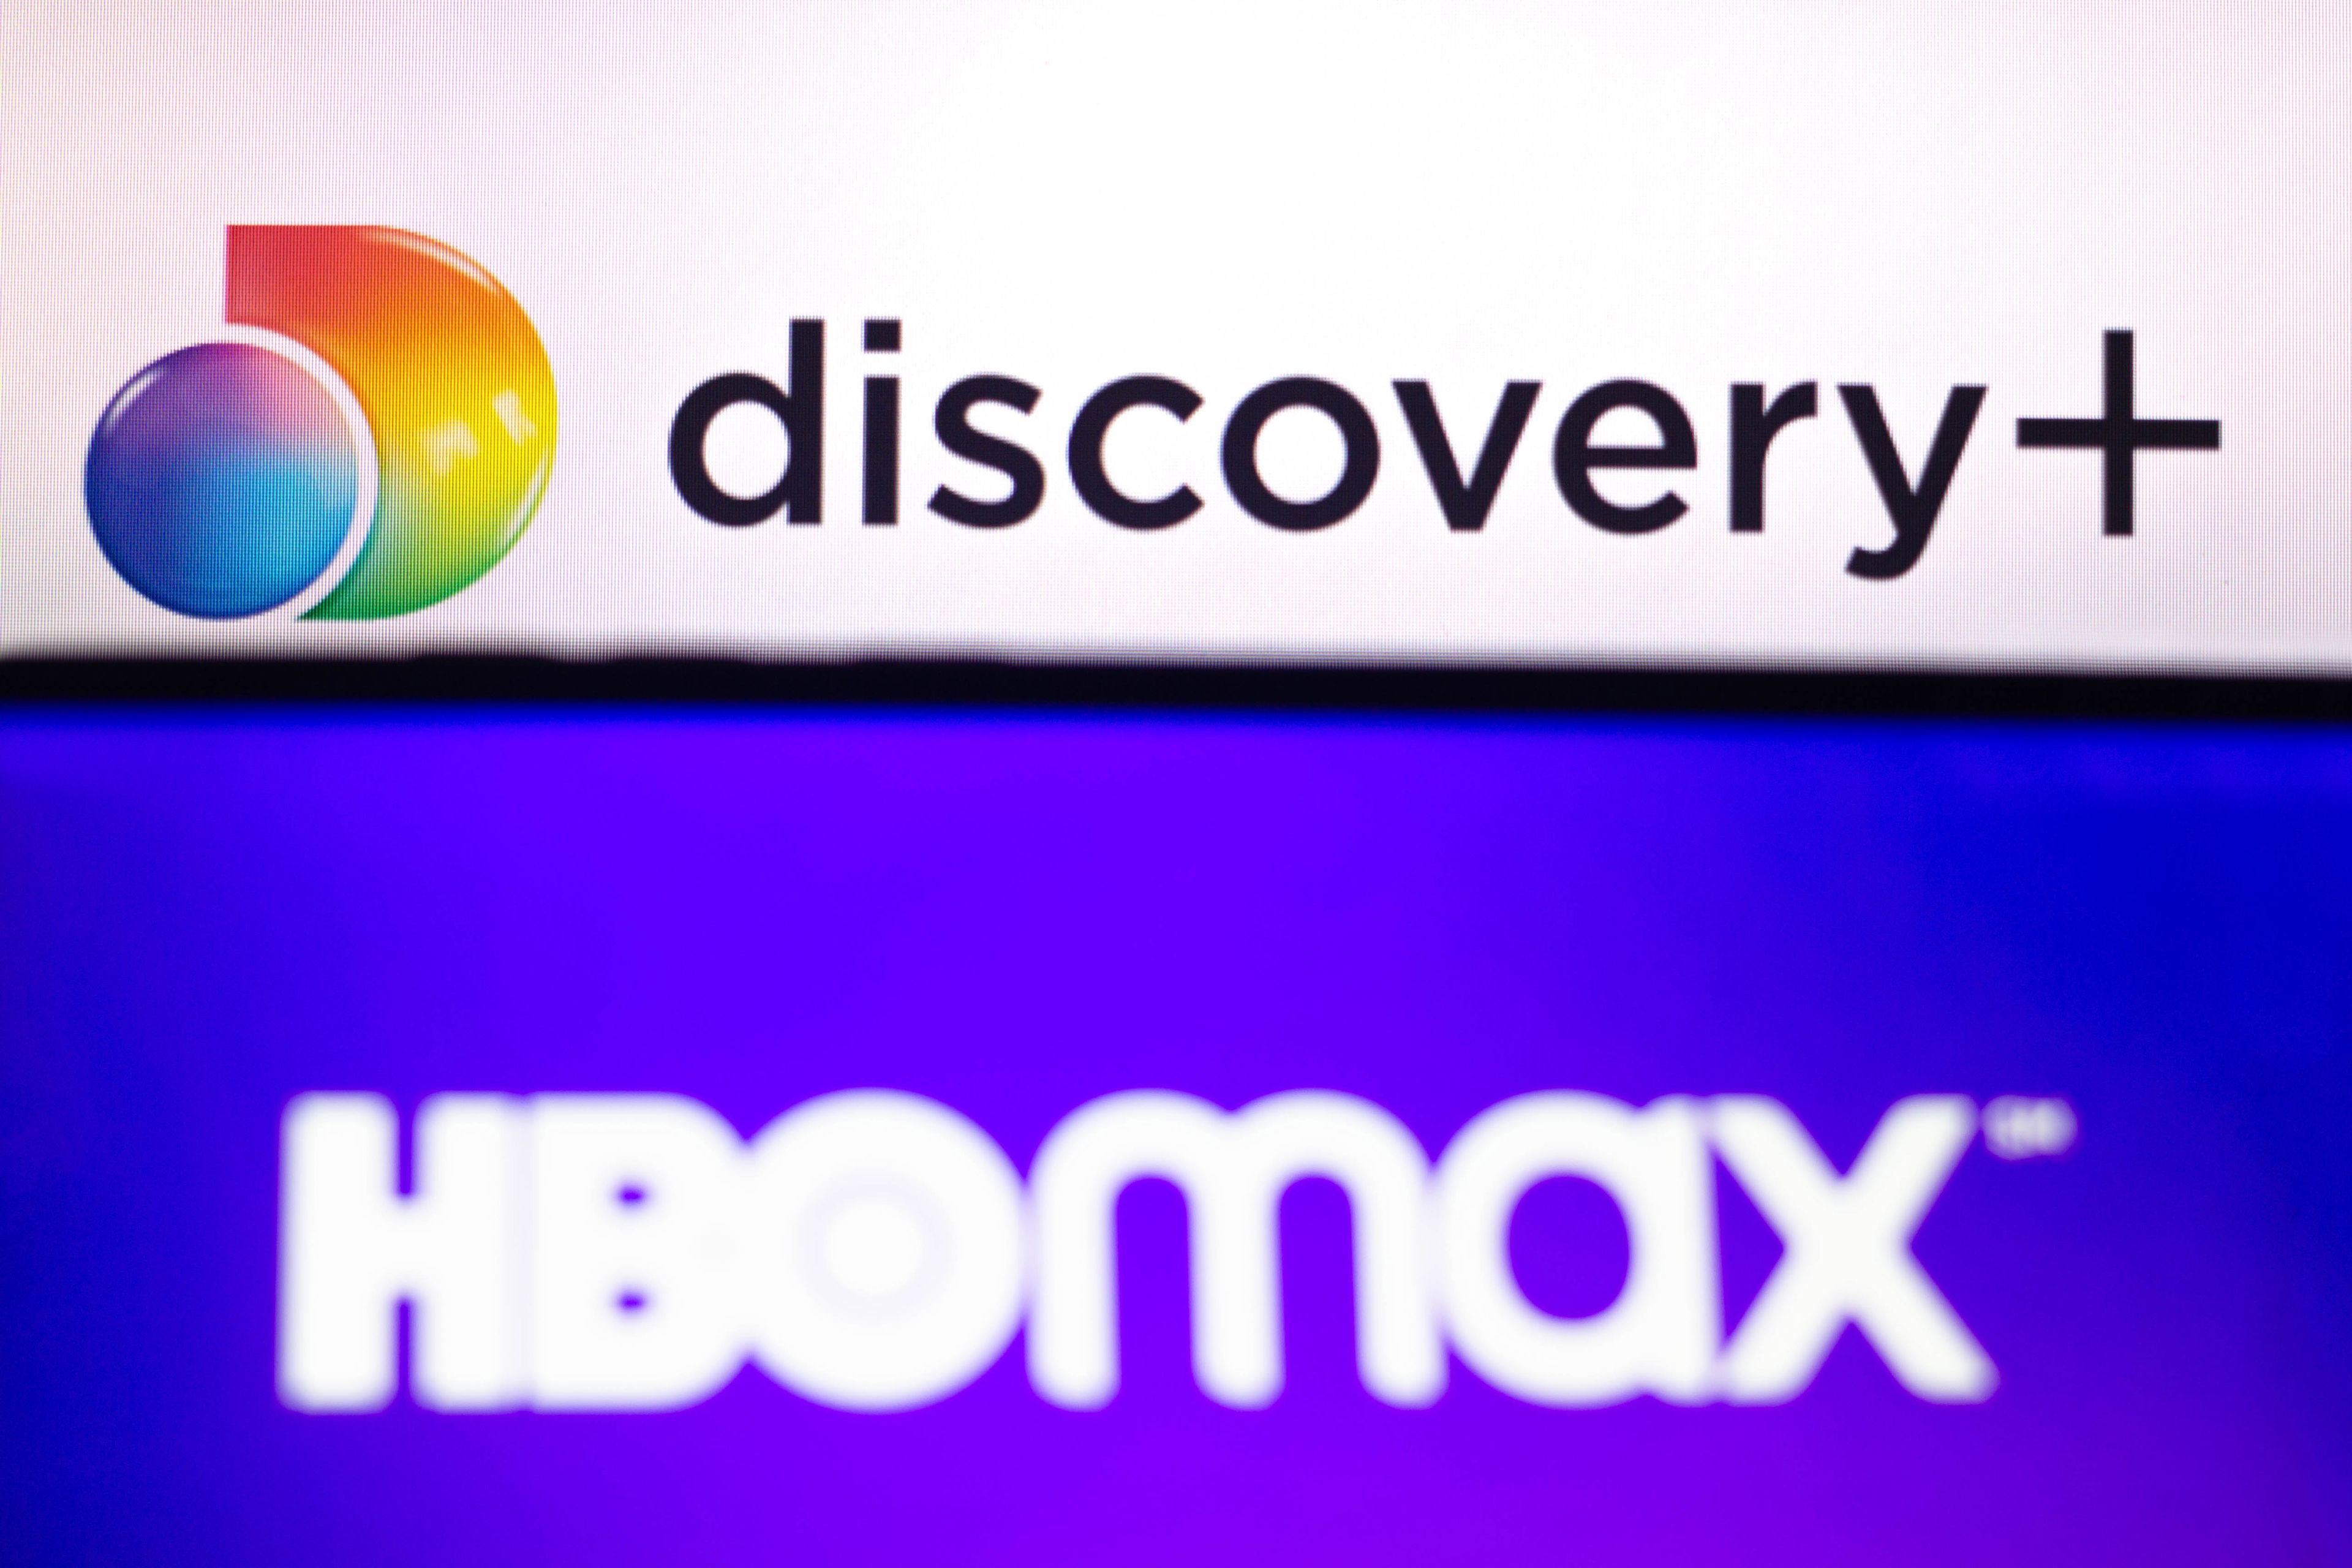 HBO Max y Discovery Plus